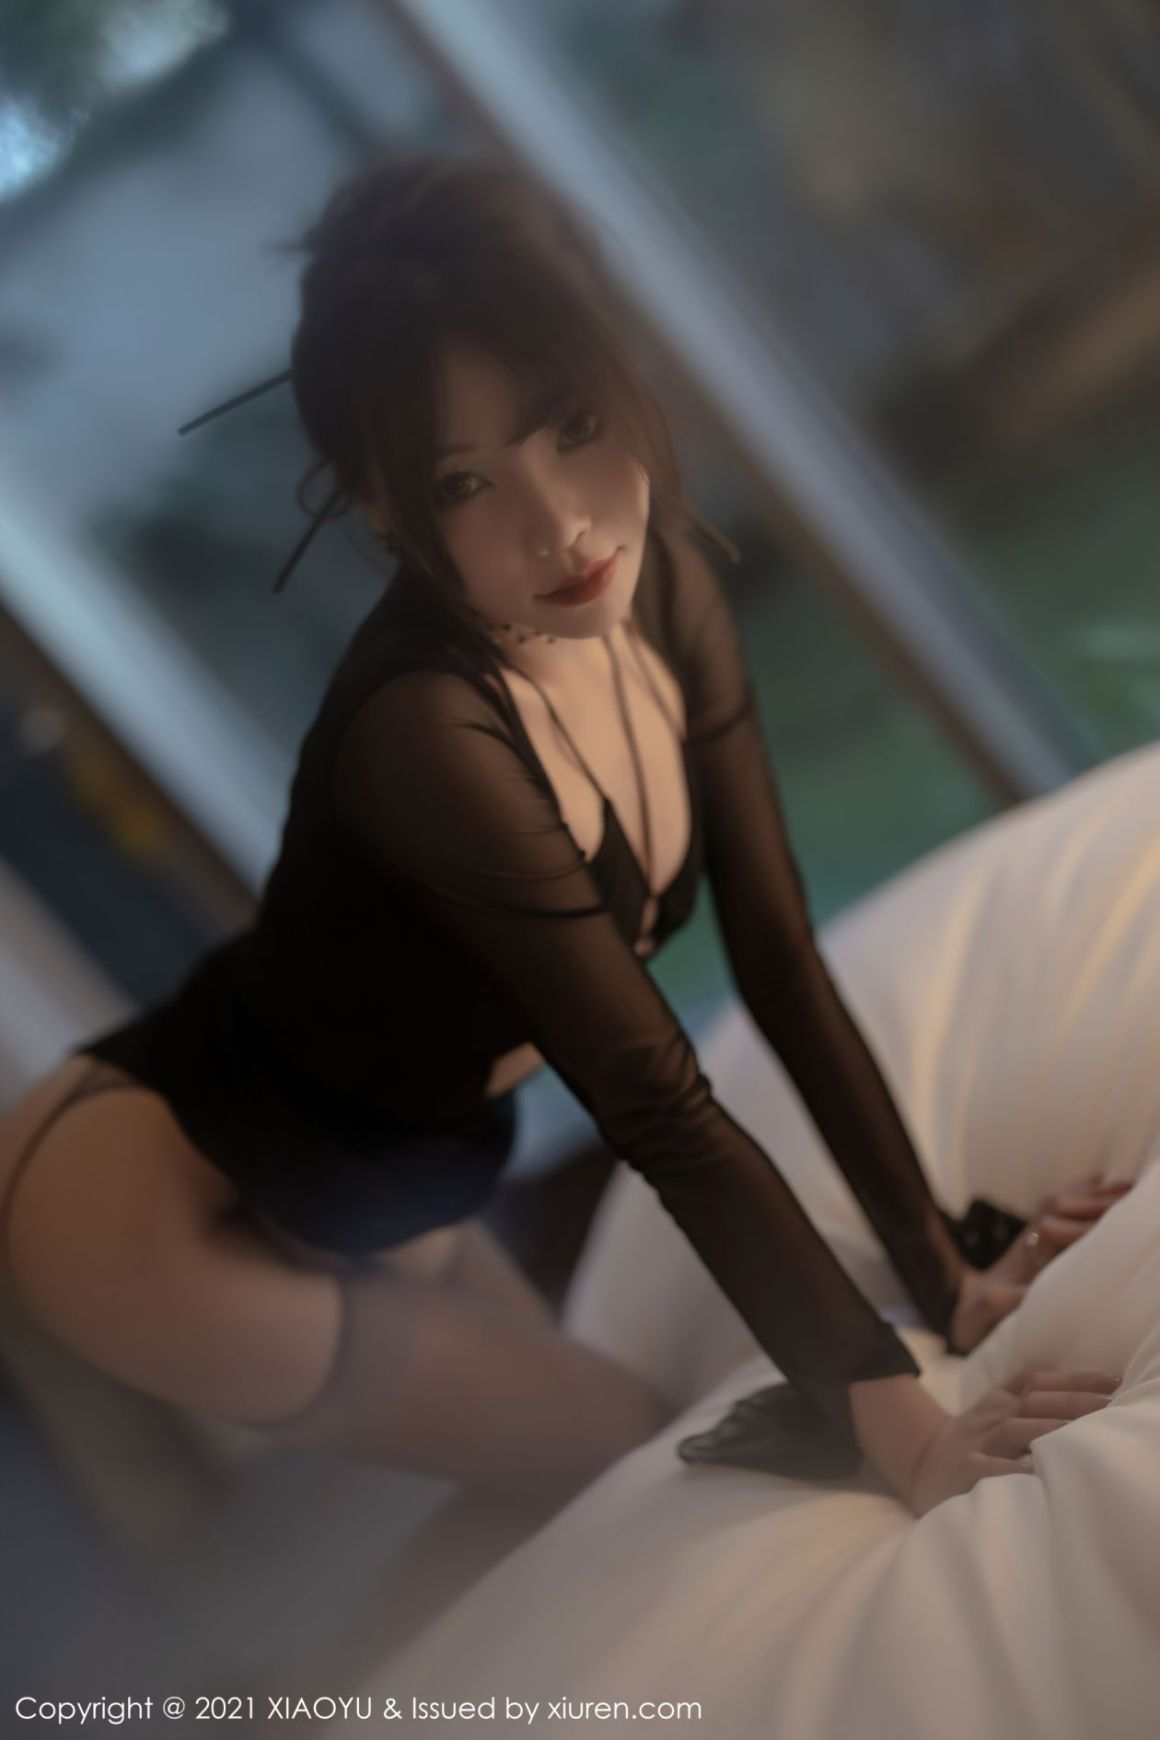 AsianOnlyfans.com 38 100 20211006